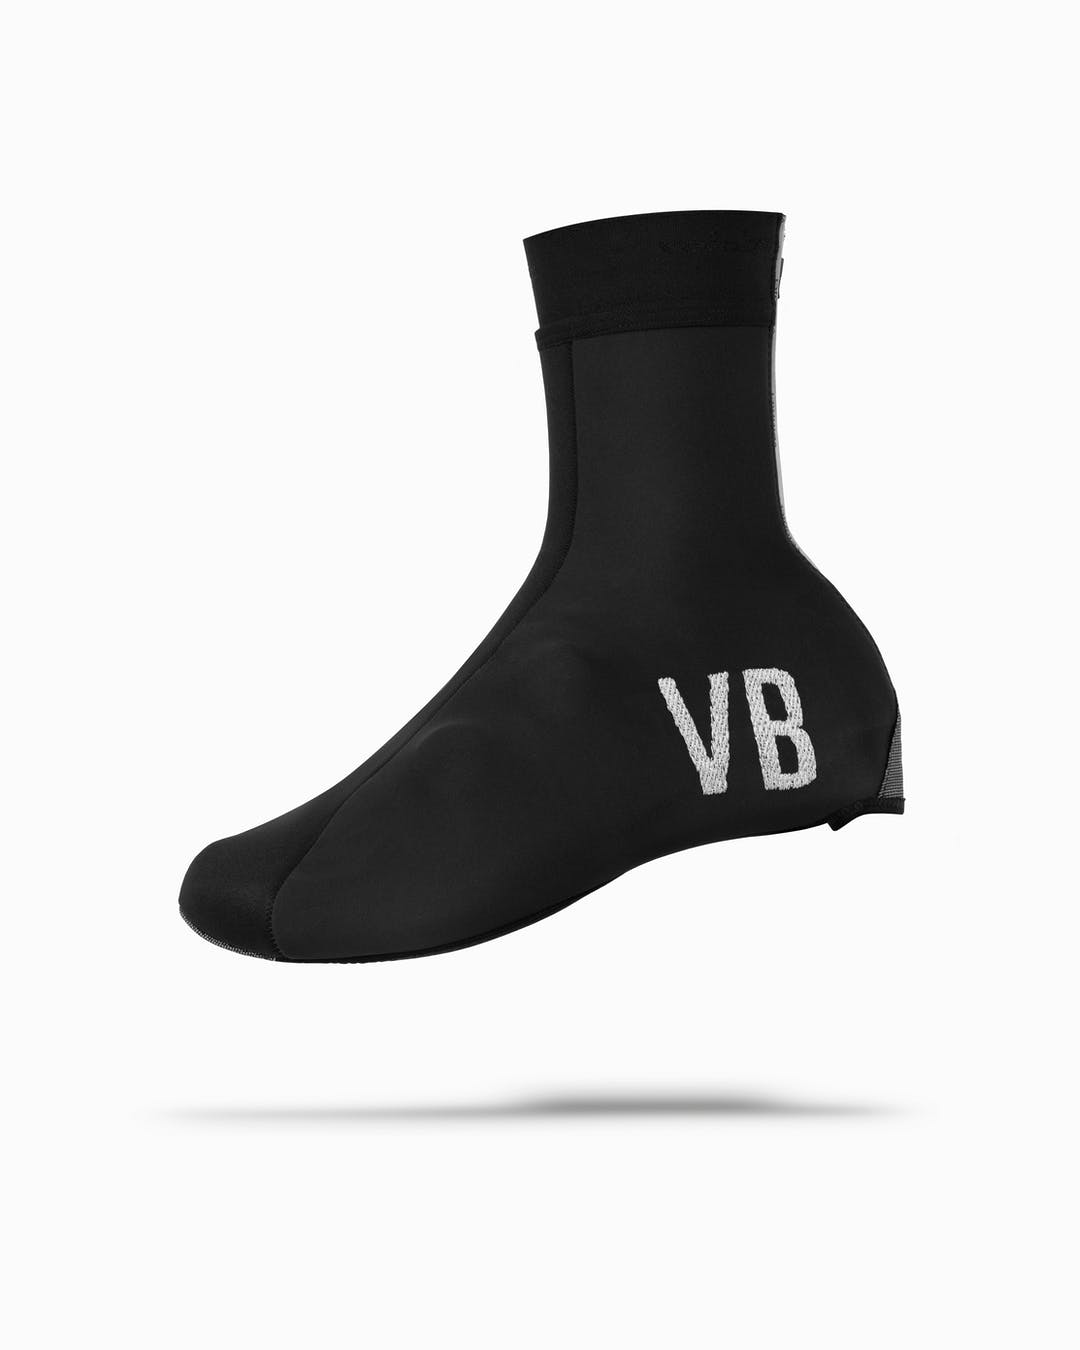 VELOBICI - THERMAL OVERSHOES - The Wheelhouse - Boutique Bike Shop